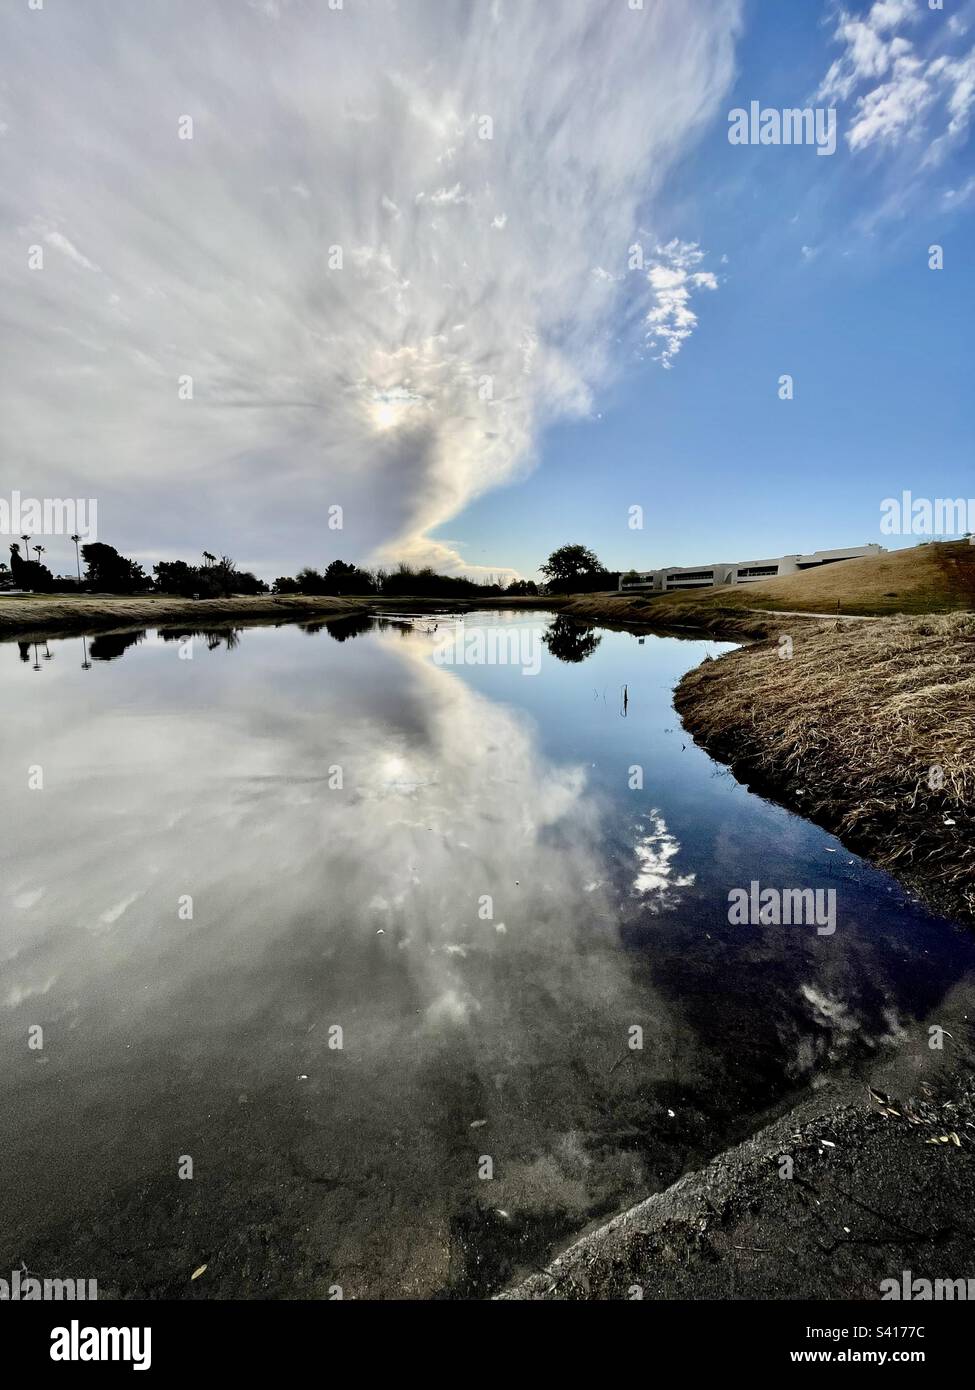 Stark curvilinear golf course pond edge contrasting with fluffy edges of the reflection of the sun battling the pearly clouds of a storm front, Scottsdale, Arizona, rosewood tree reflection on horizon Stock Photo